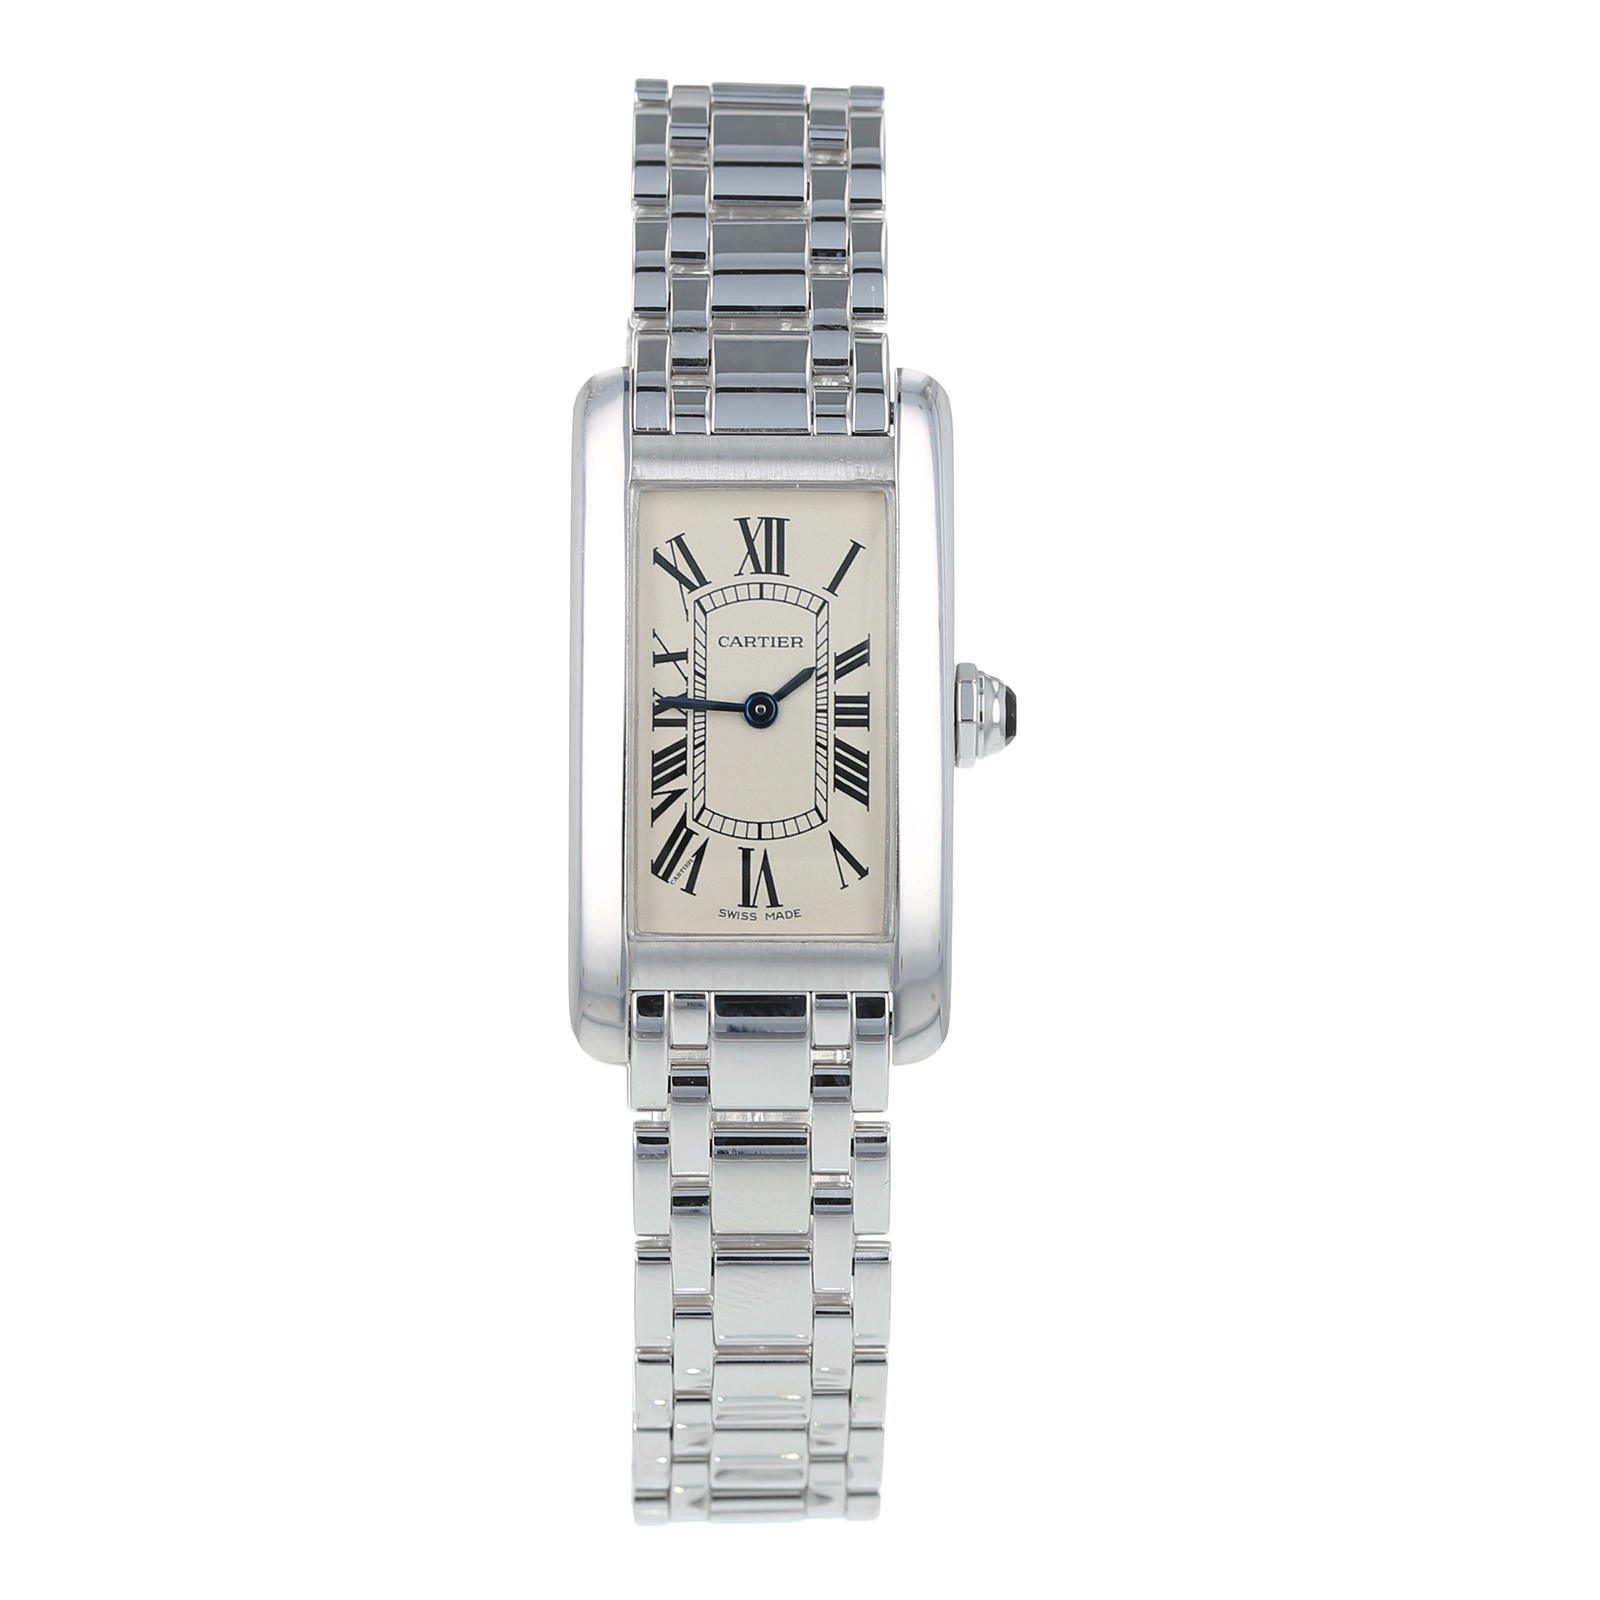 second hand ladies cartier tank watches